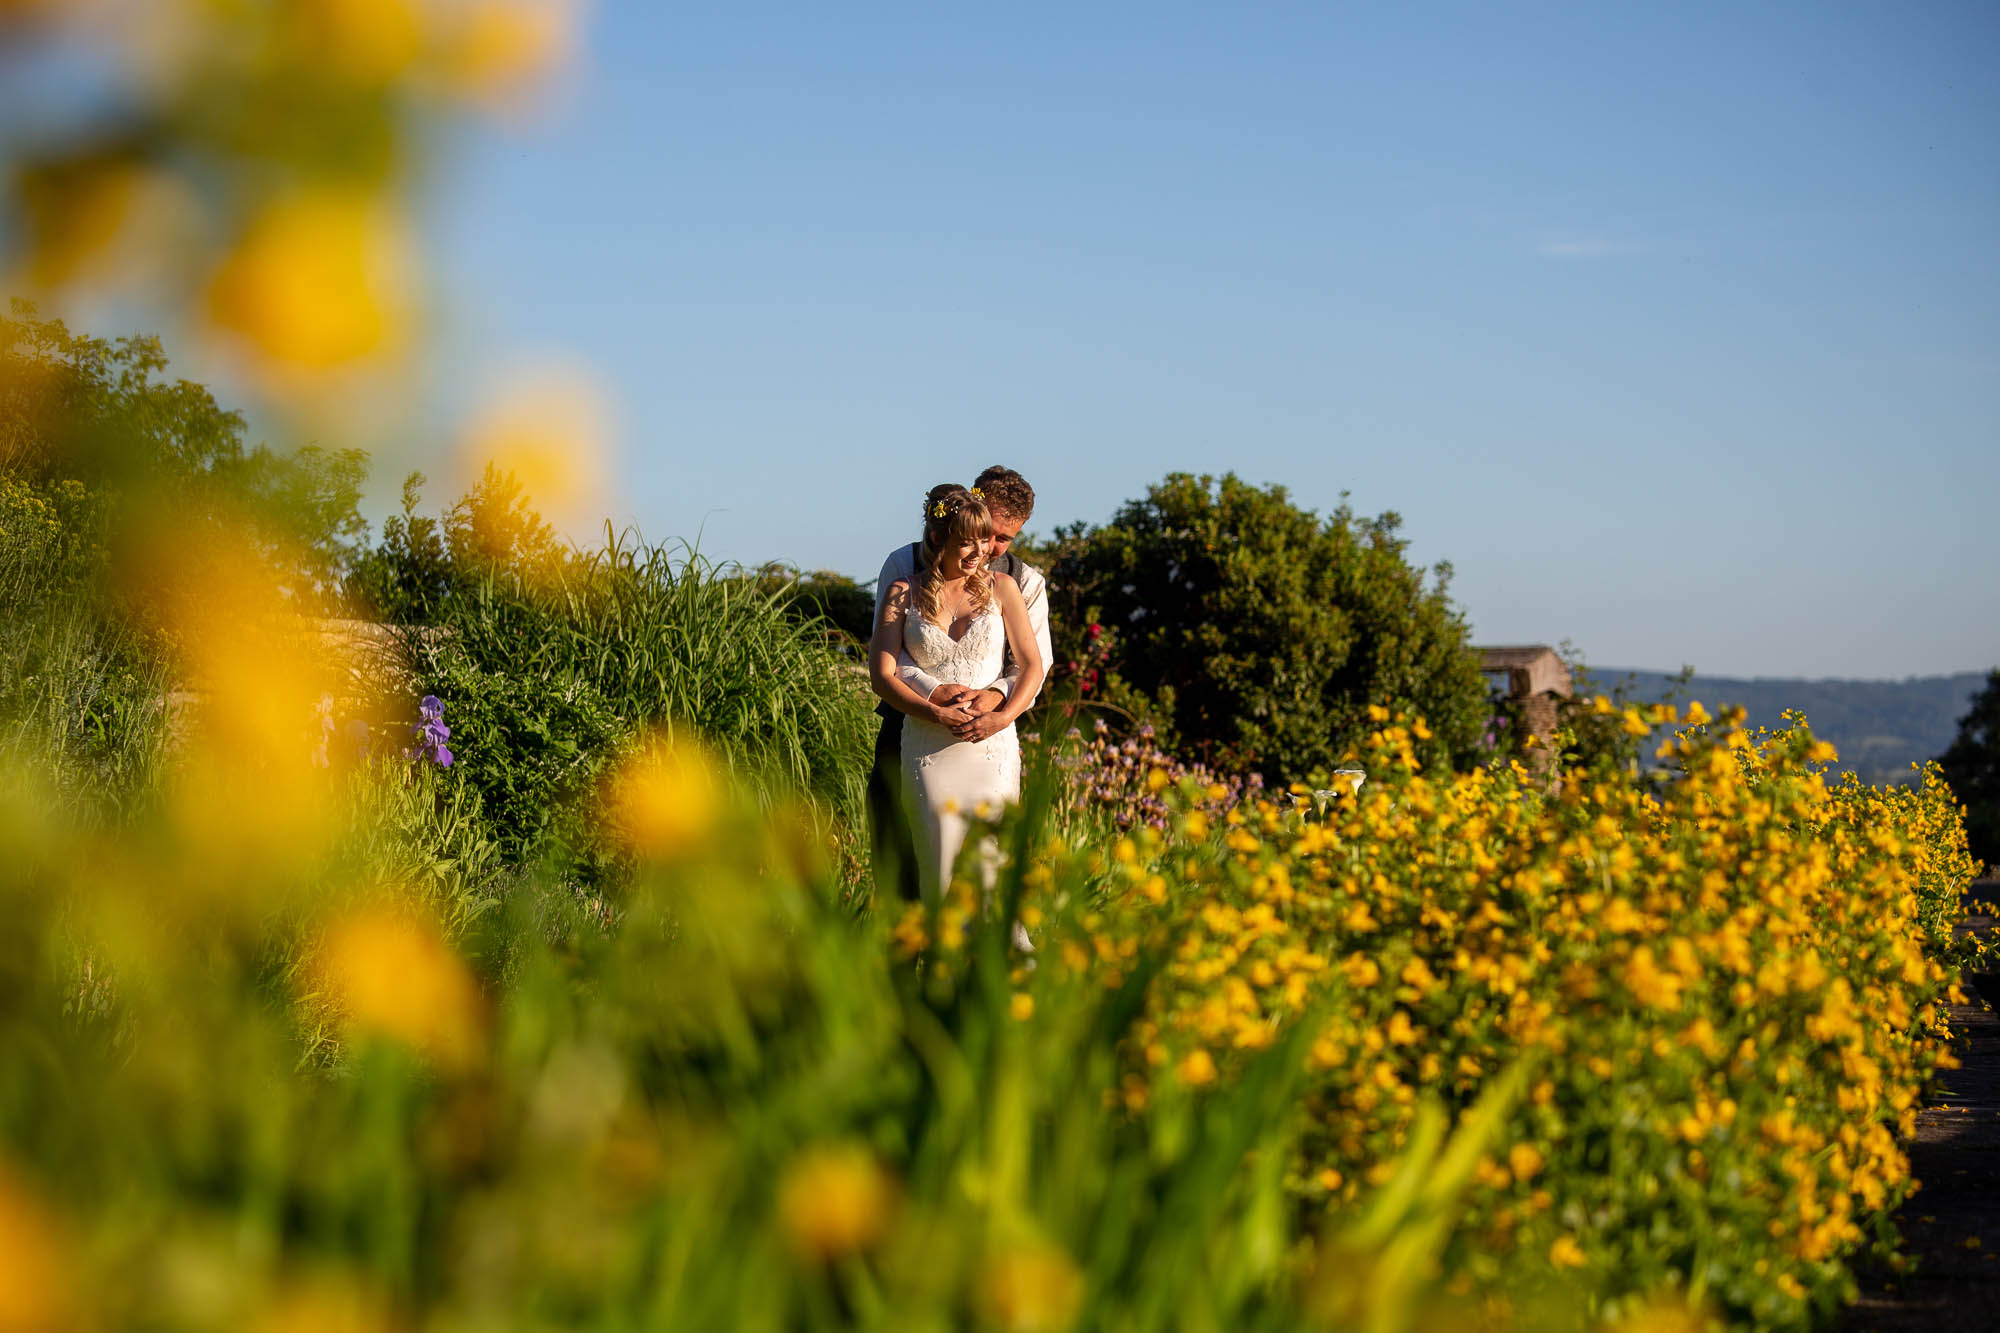 Meg and Joe's sunflower wedding at Hestercombe is full of sunshine and vibrant styling touches. With Martin Dabek Photography